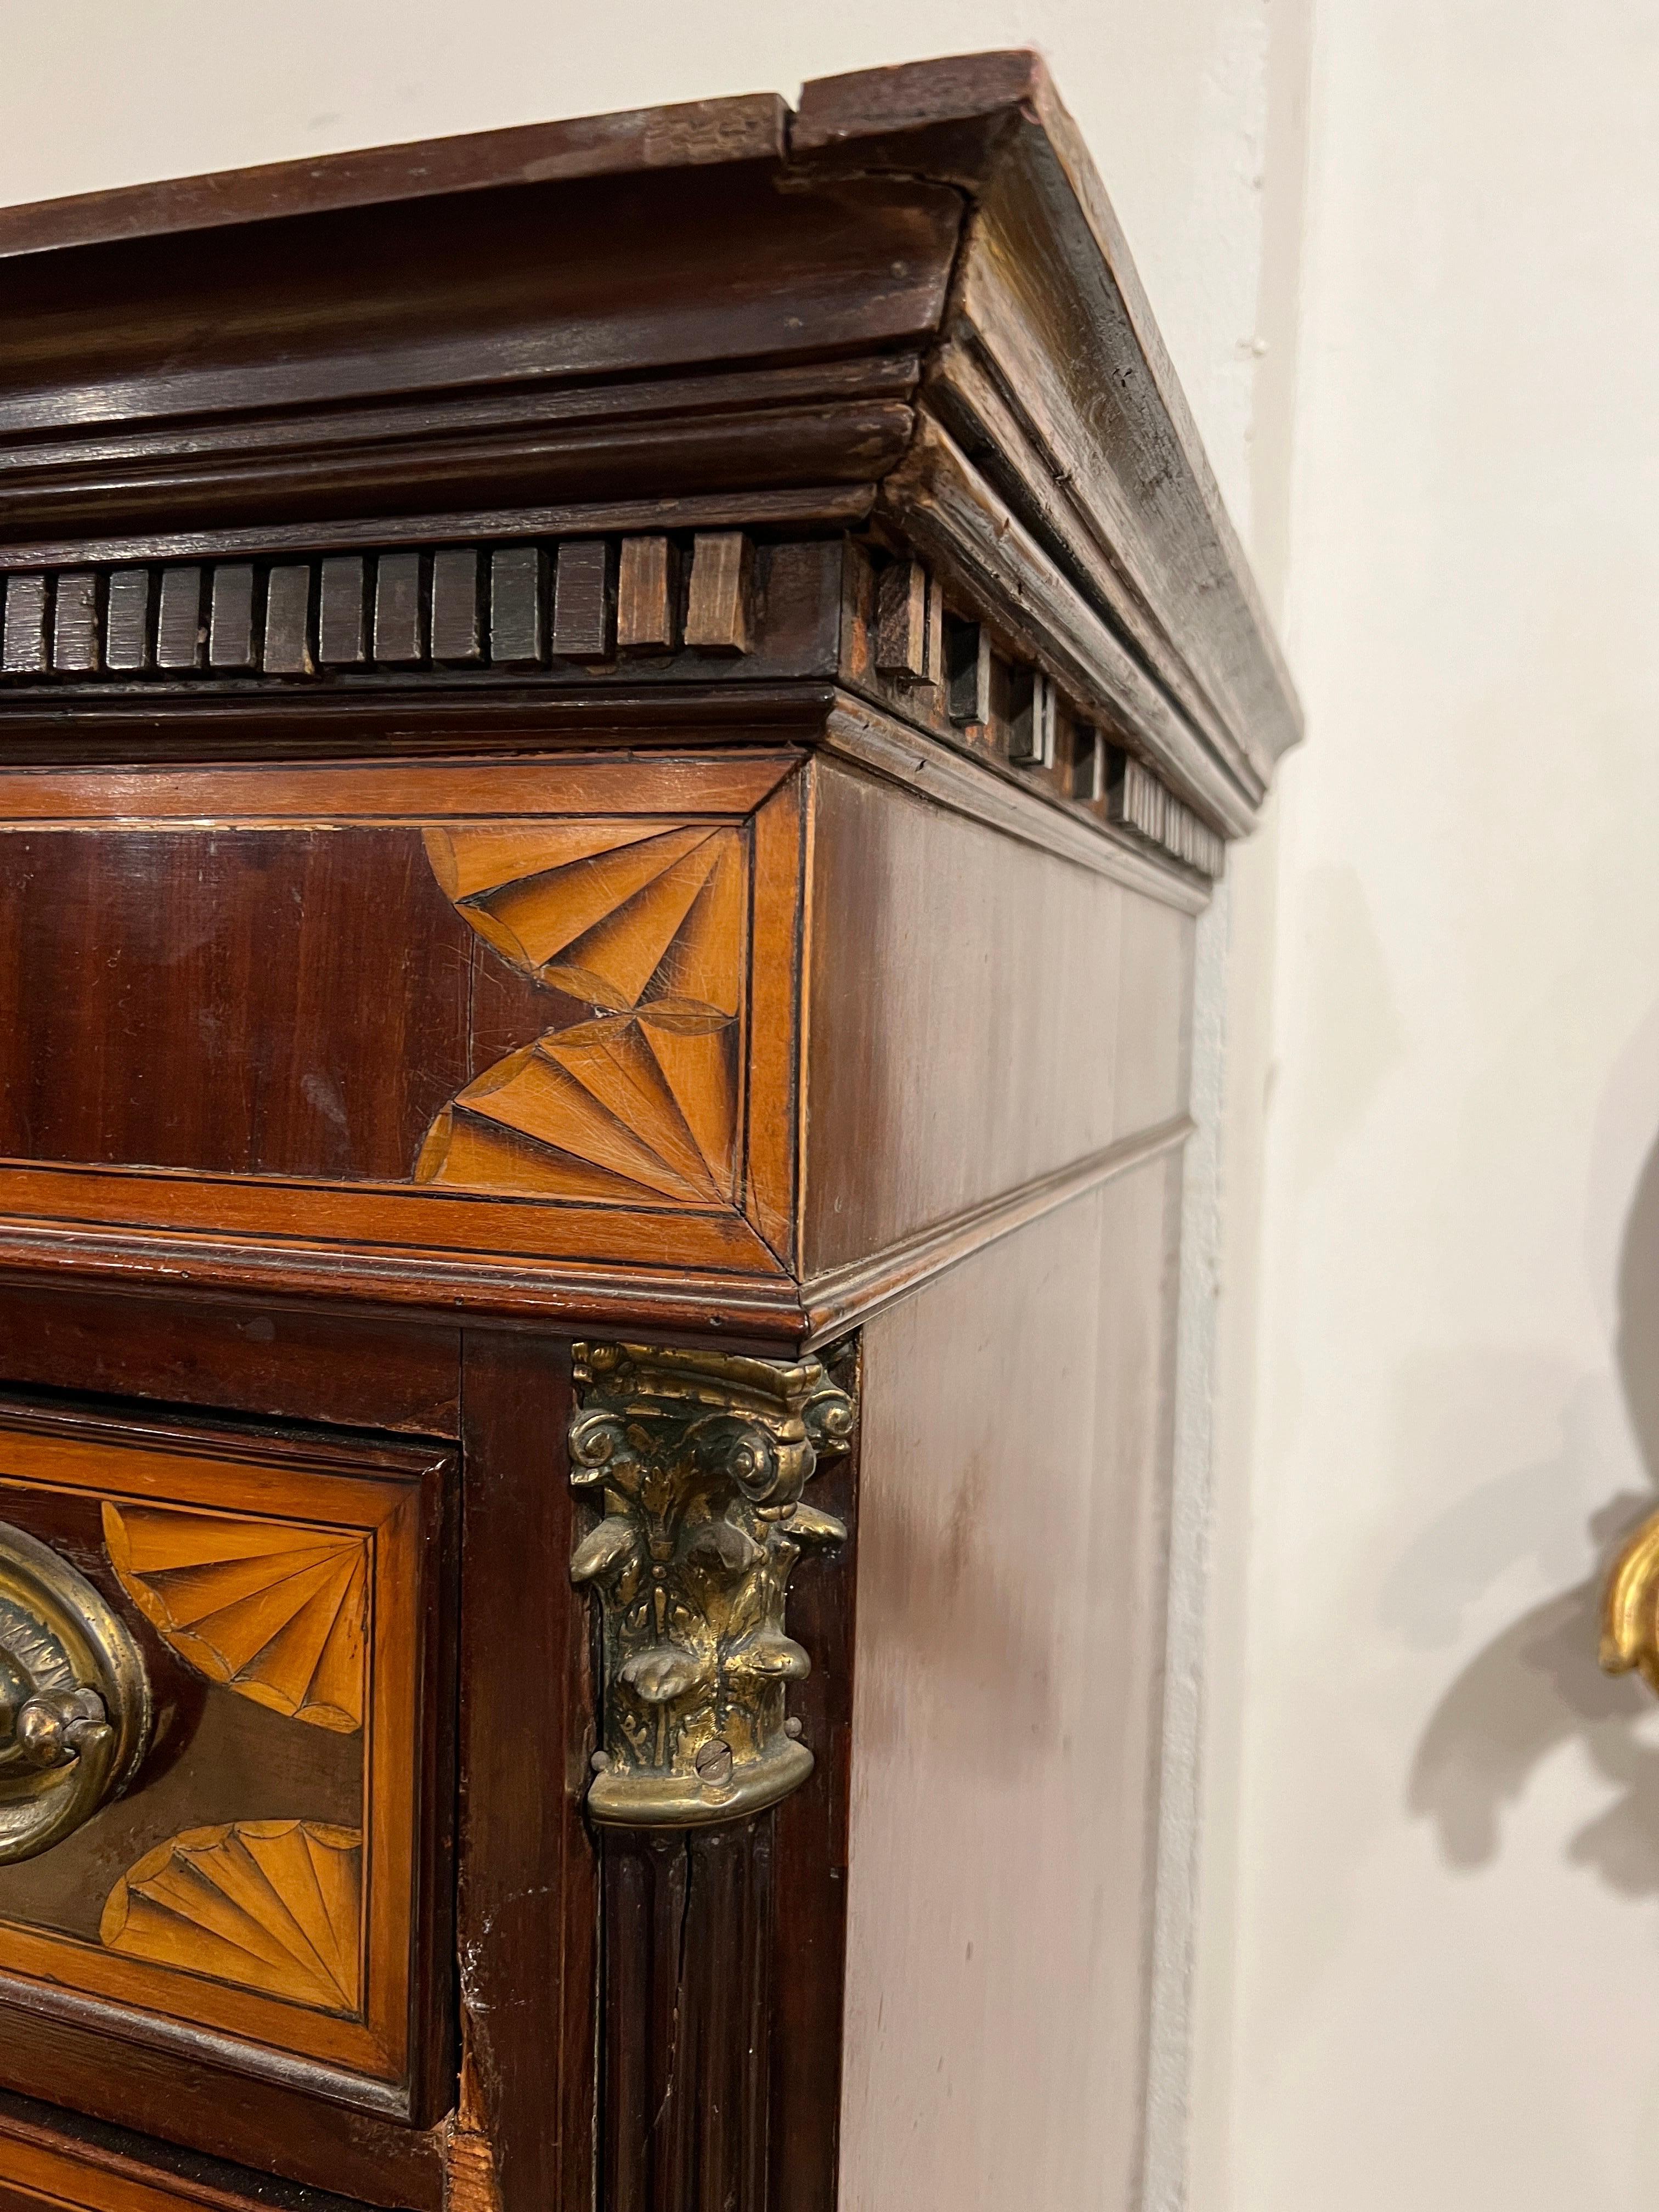 18th Century English George III Mahogany Inlaid Secretaire Chest of Drawers 1700 For Sale 1